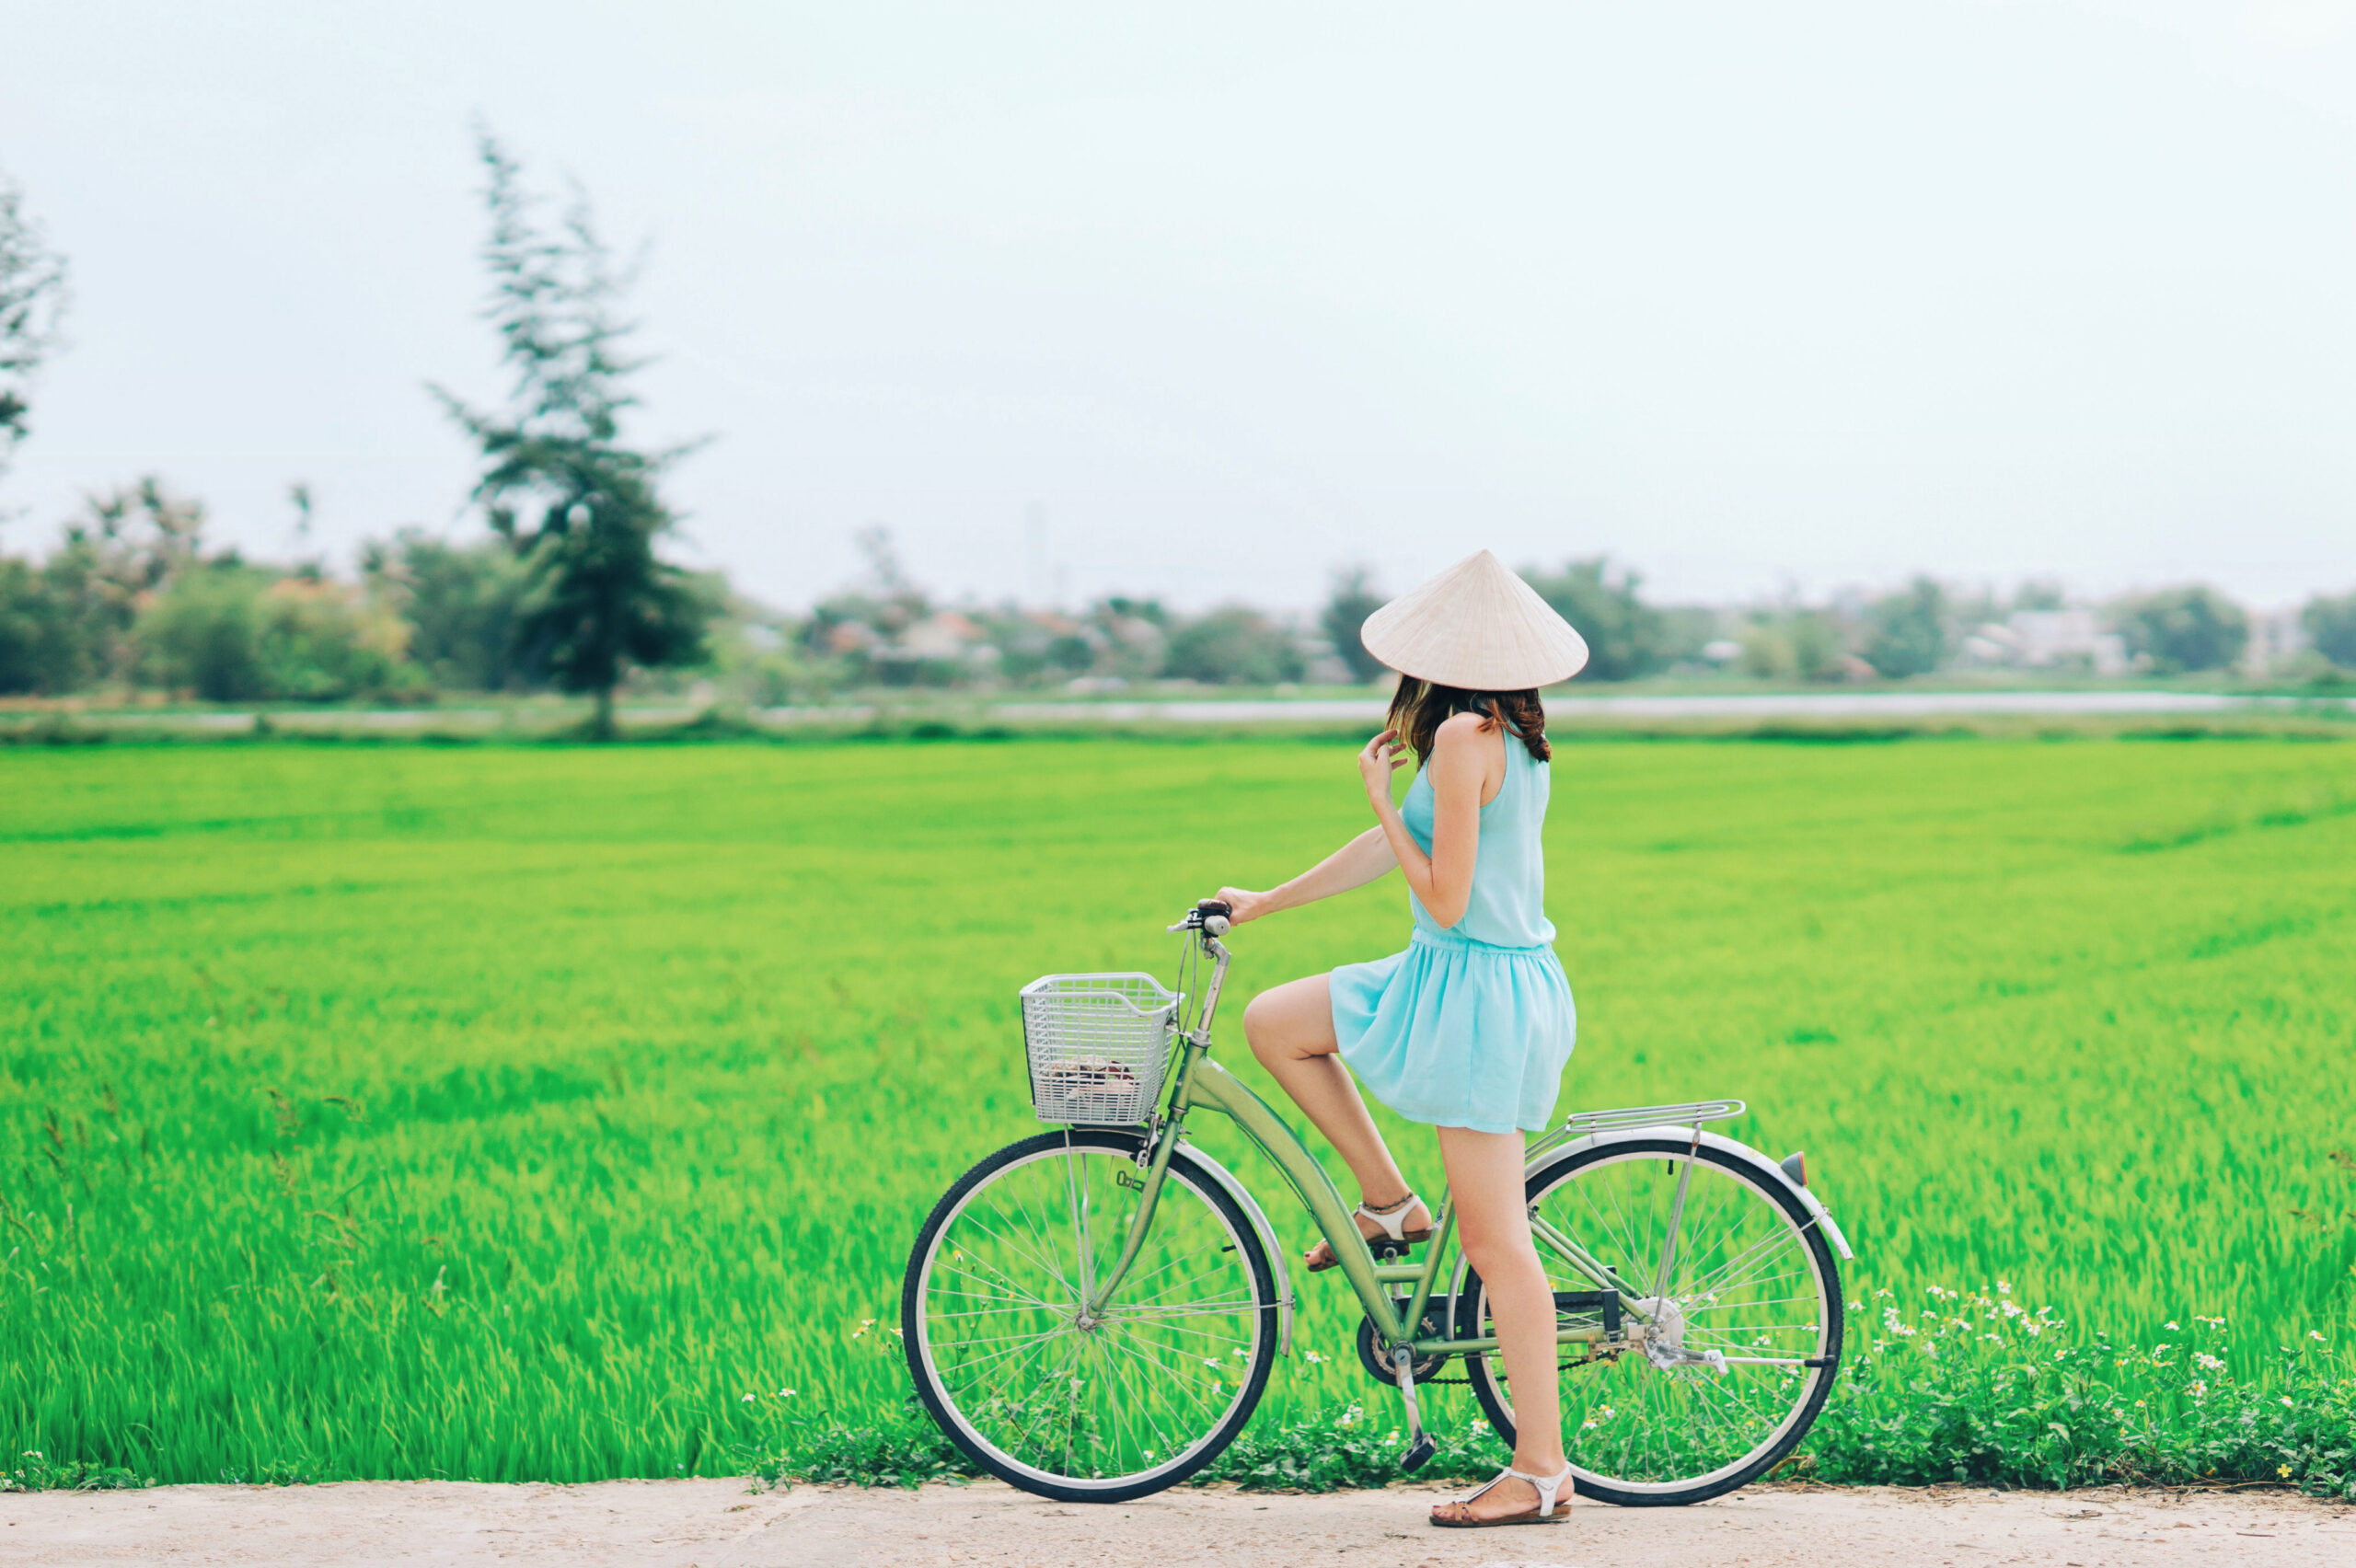 A lady wearing a blue dress and Vietnamese non-la hat, rides a bicycle and overlooks the vast green rice beautiful paddy fields